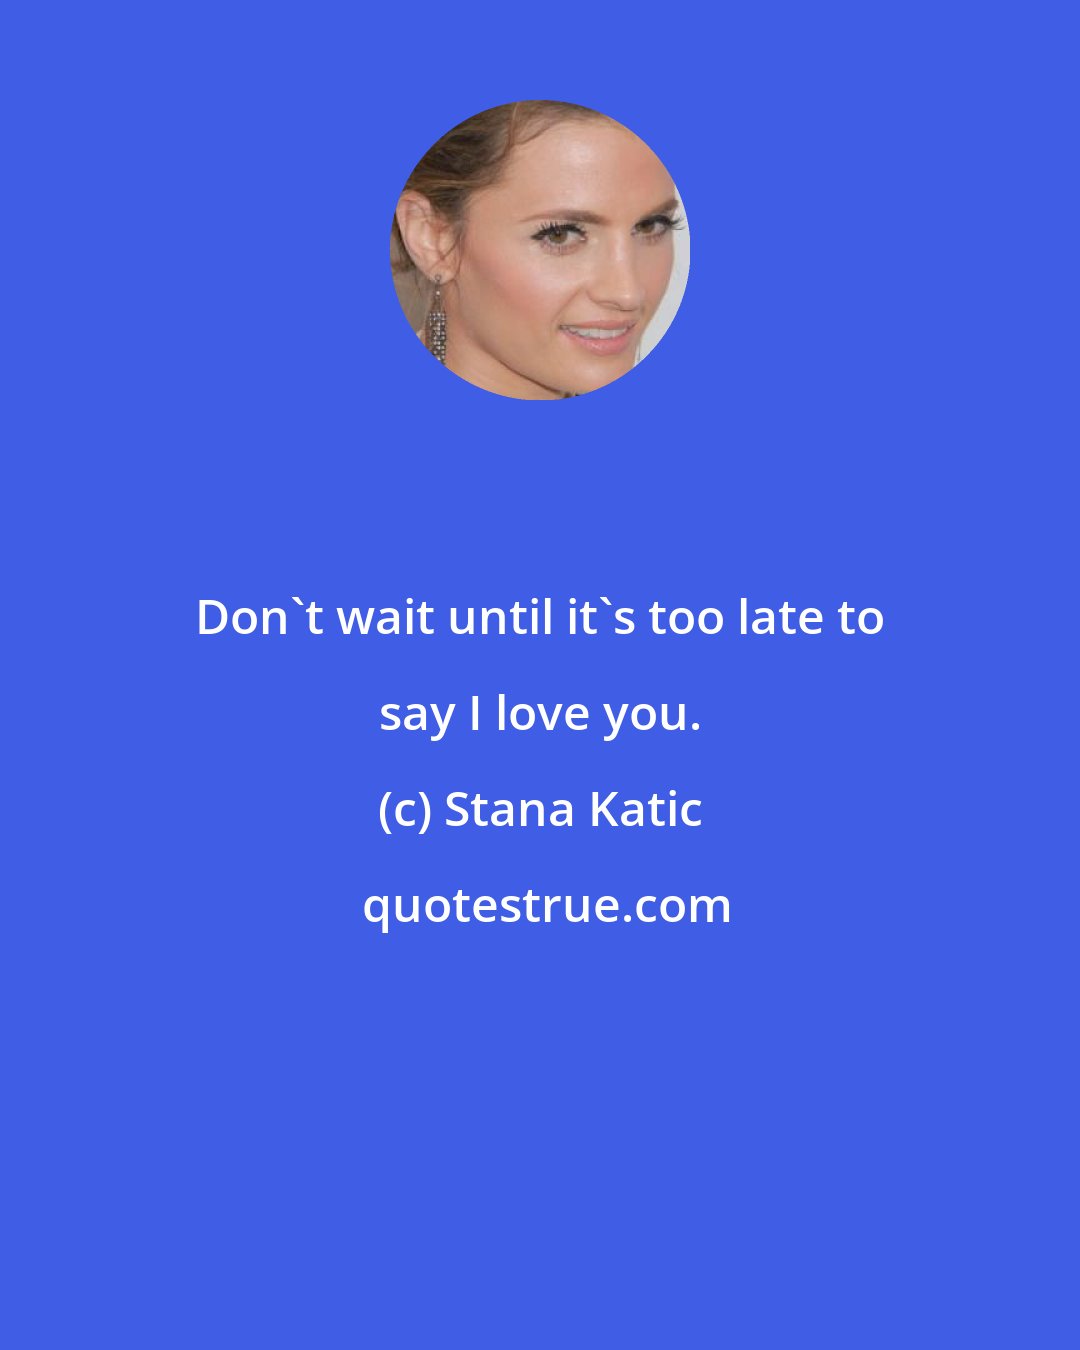 Stana Katic: Don't wait until it's too late to say I love you.